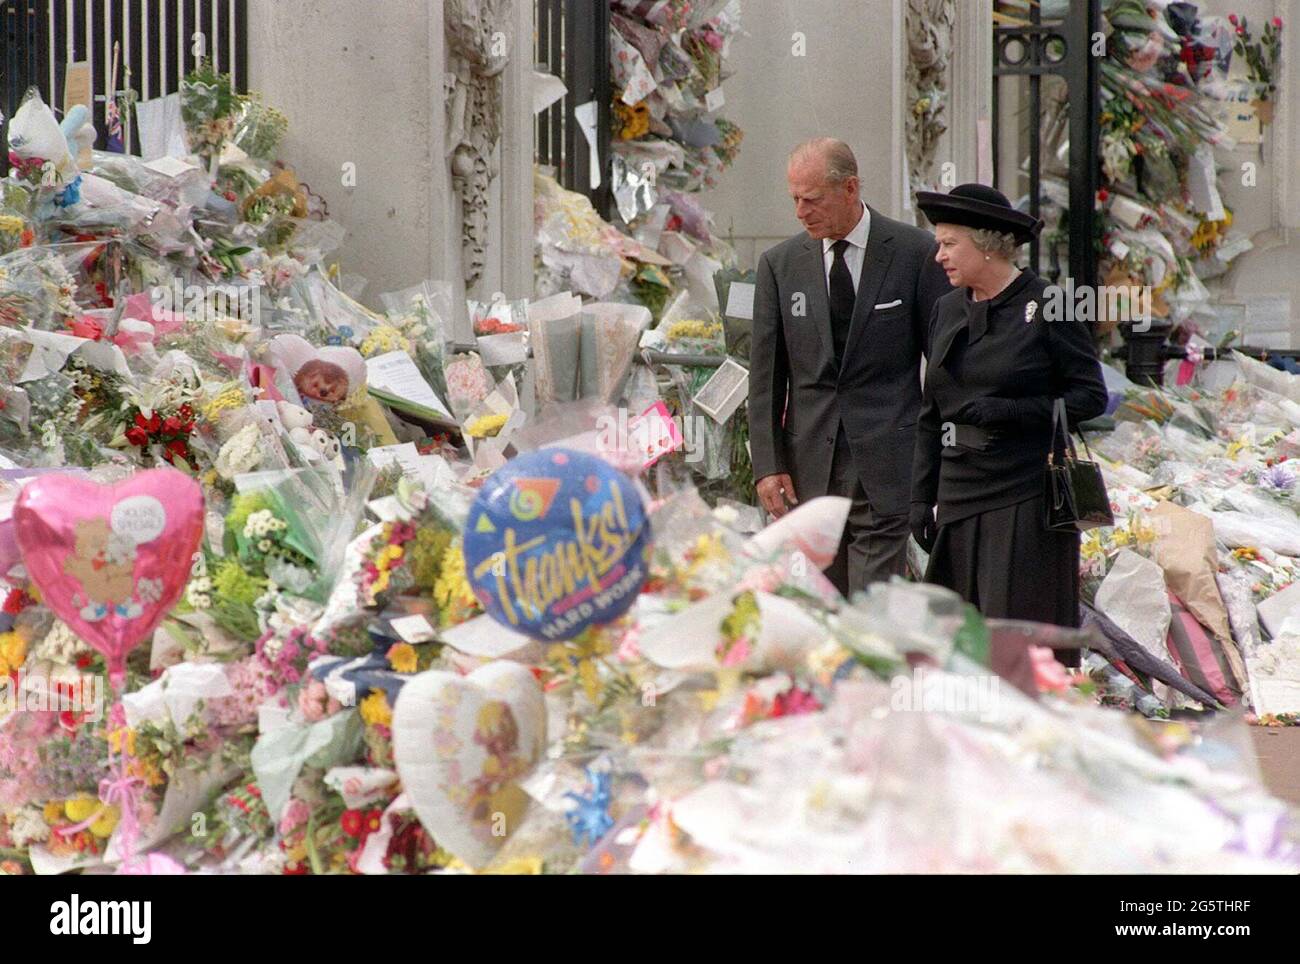 File photo dated 05/09/97 of Queen Elizabeth II and the Duke of Edinburgh viewing the floral tributes to Diana, Princess of Wales, at Buckingham Palace.The Duke of Cambridge and the Duke of Sussex are preparing to honour their mother Diana, Princess of Wales by unveiling a statue on Thursday on what would have been her 60th birthday. Issue date: Wednesday June 30, 2021. Stock Photo